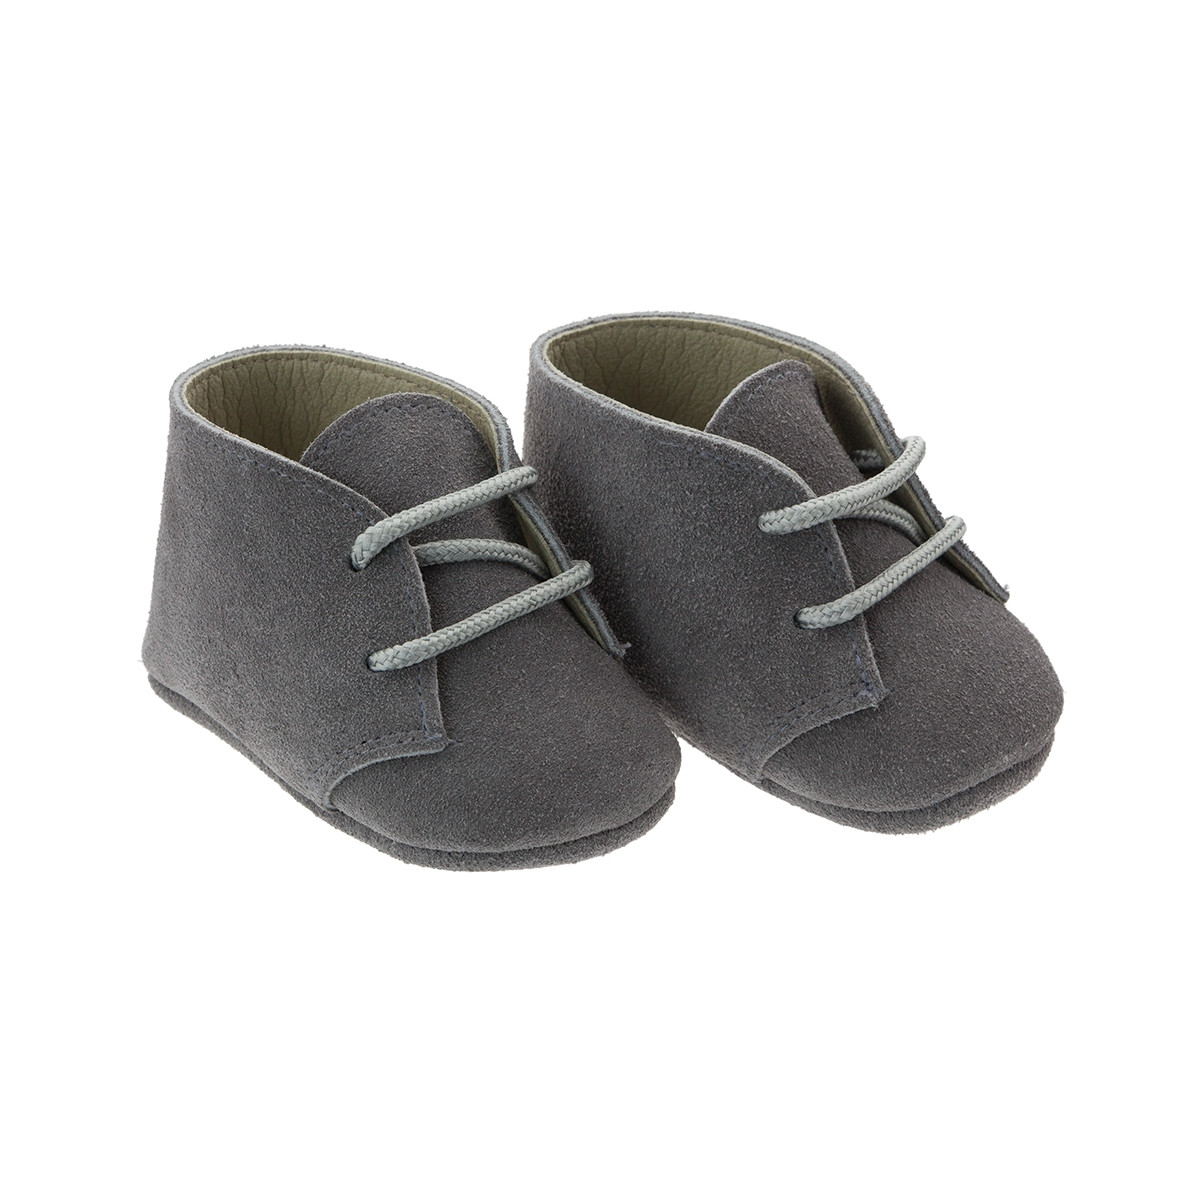 WINTER BABY SHOES MOD.605 GREY CAMBRASS - 1